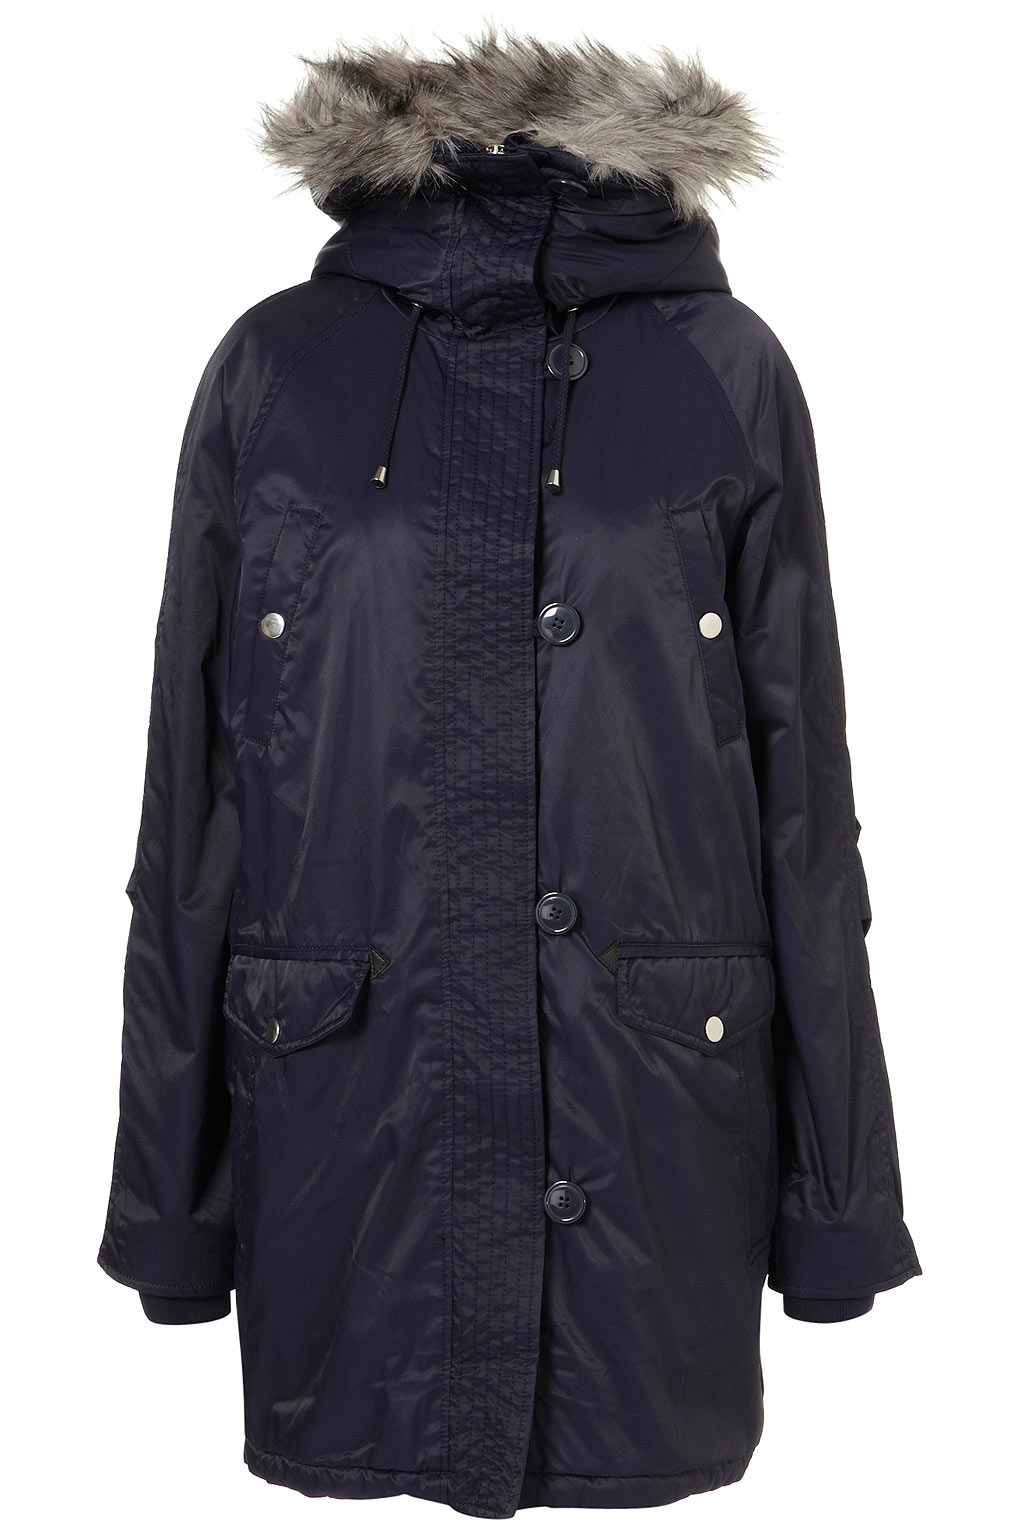 Topshop Luxe Nylon Parka in Blue (navy blue) | Lyst